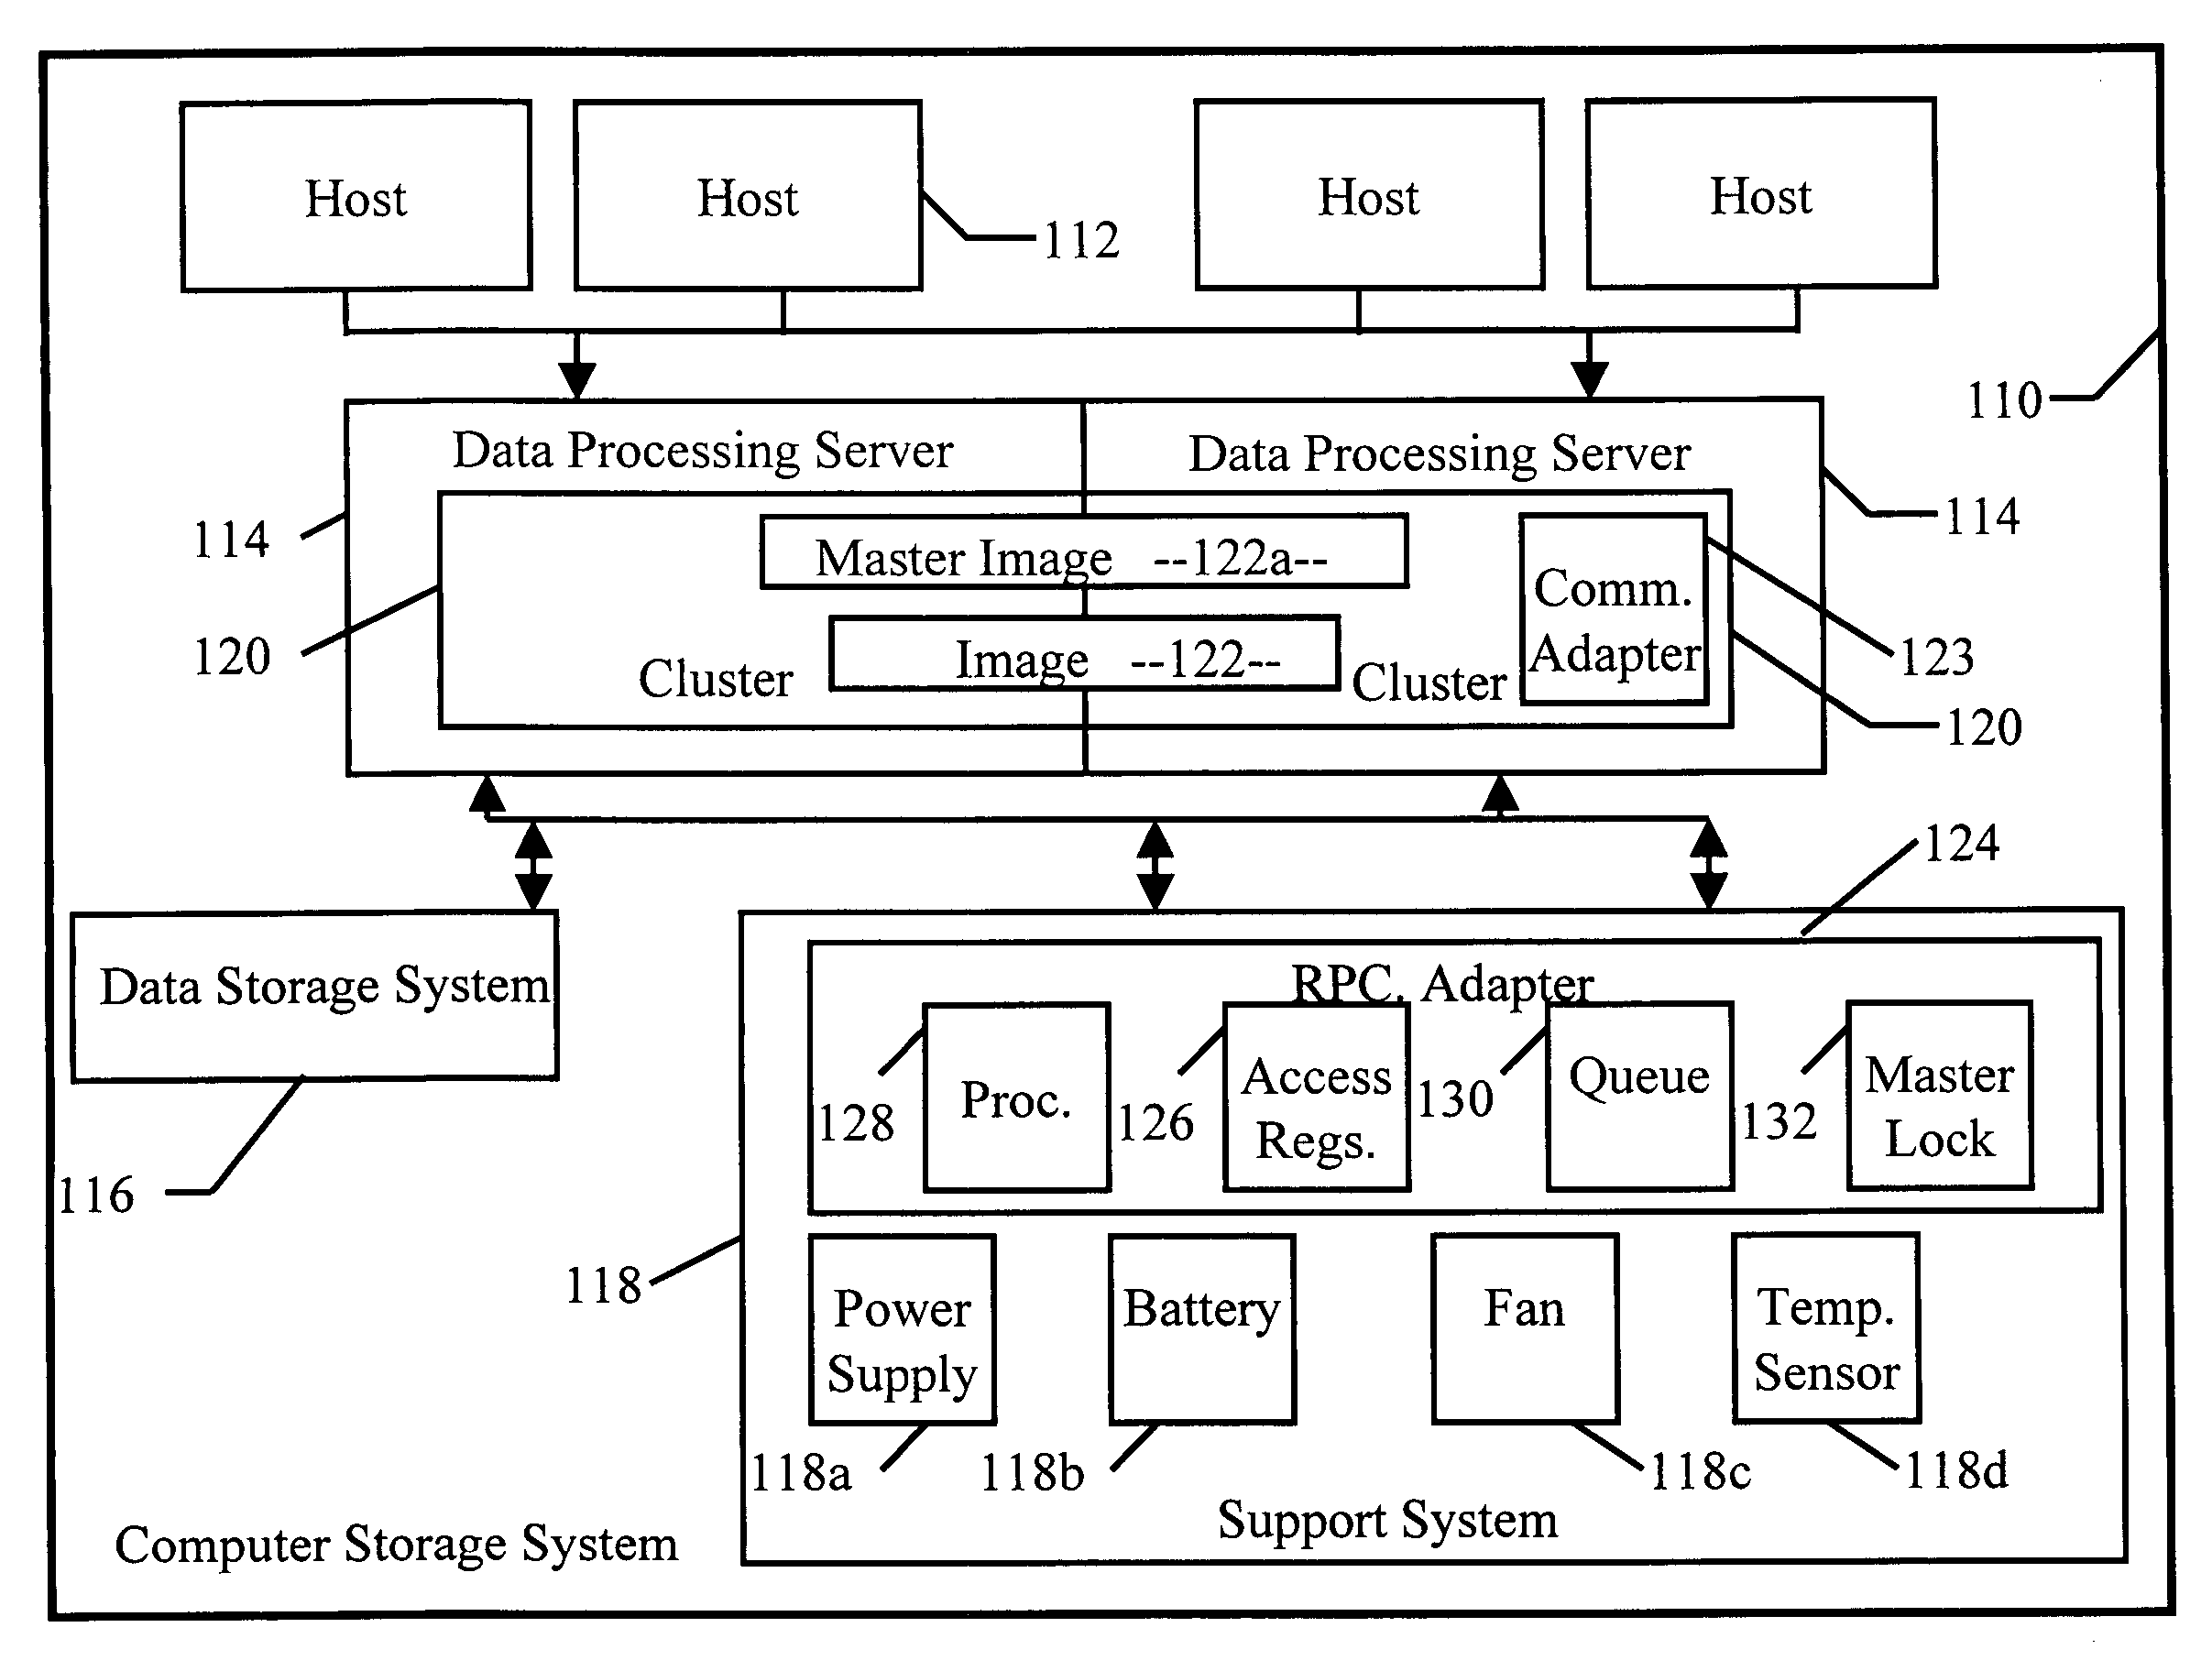 Multi-image hardware access system for managing access to computer support systems